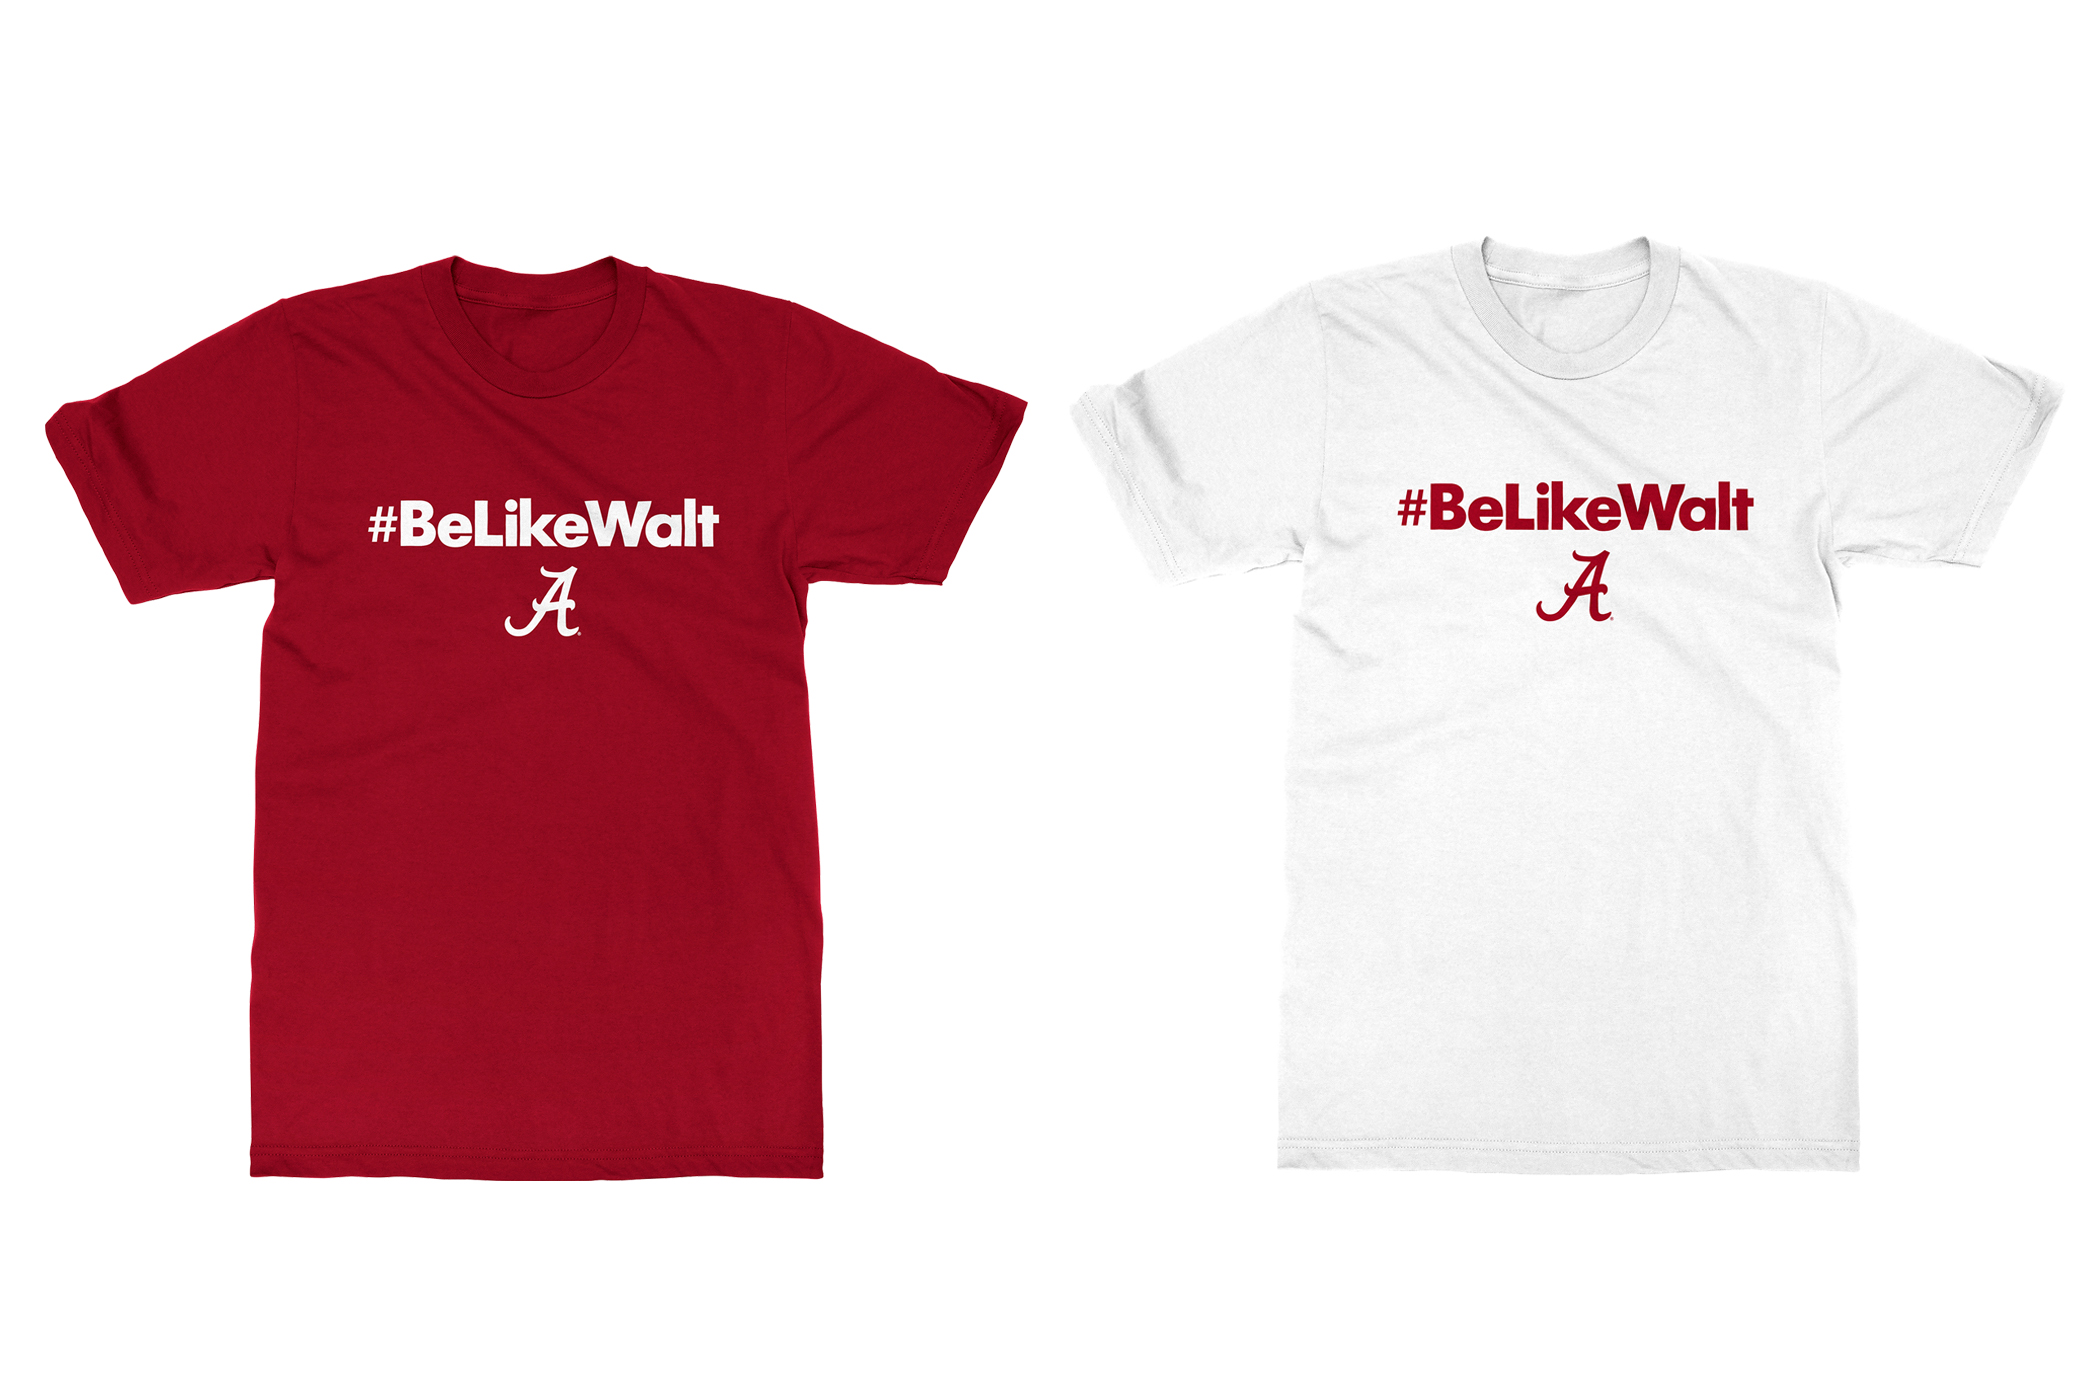 UA Supe Store Selling #BeLikeWalt Merchandise to Support Scholarship